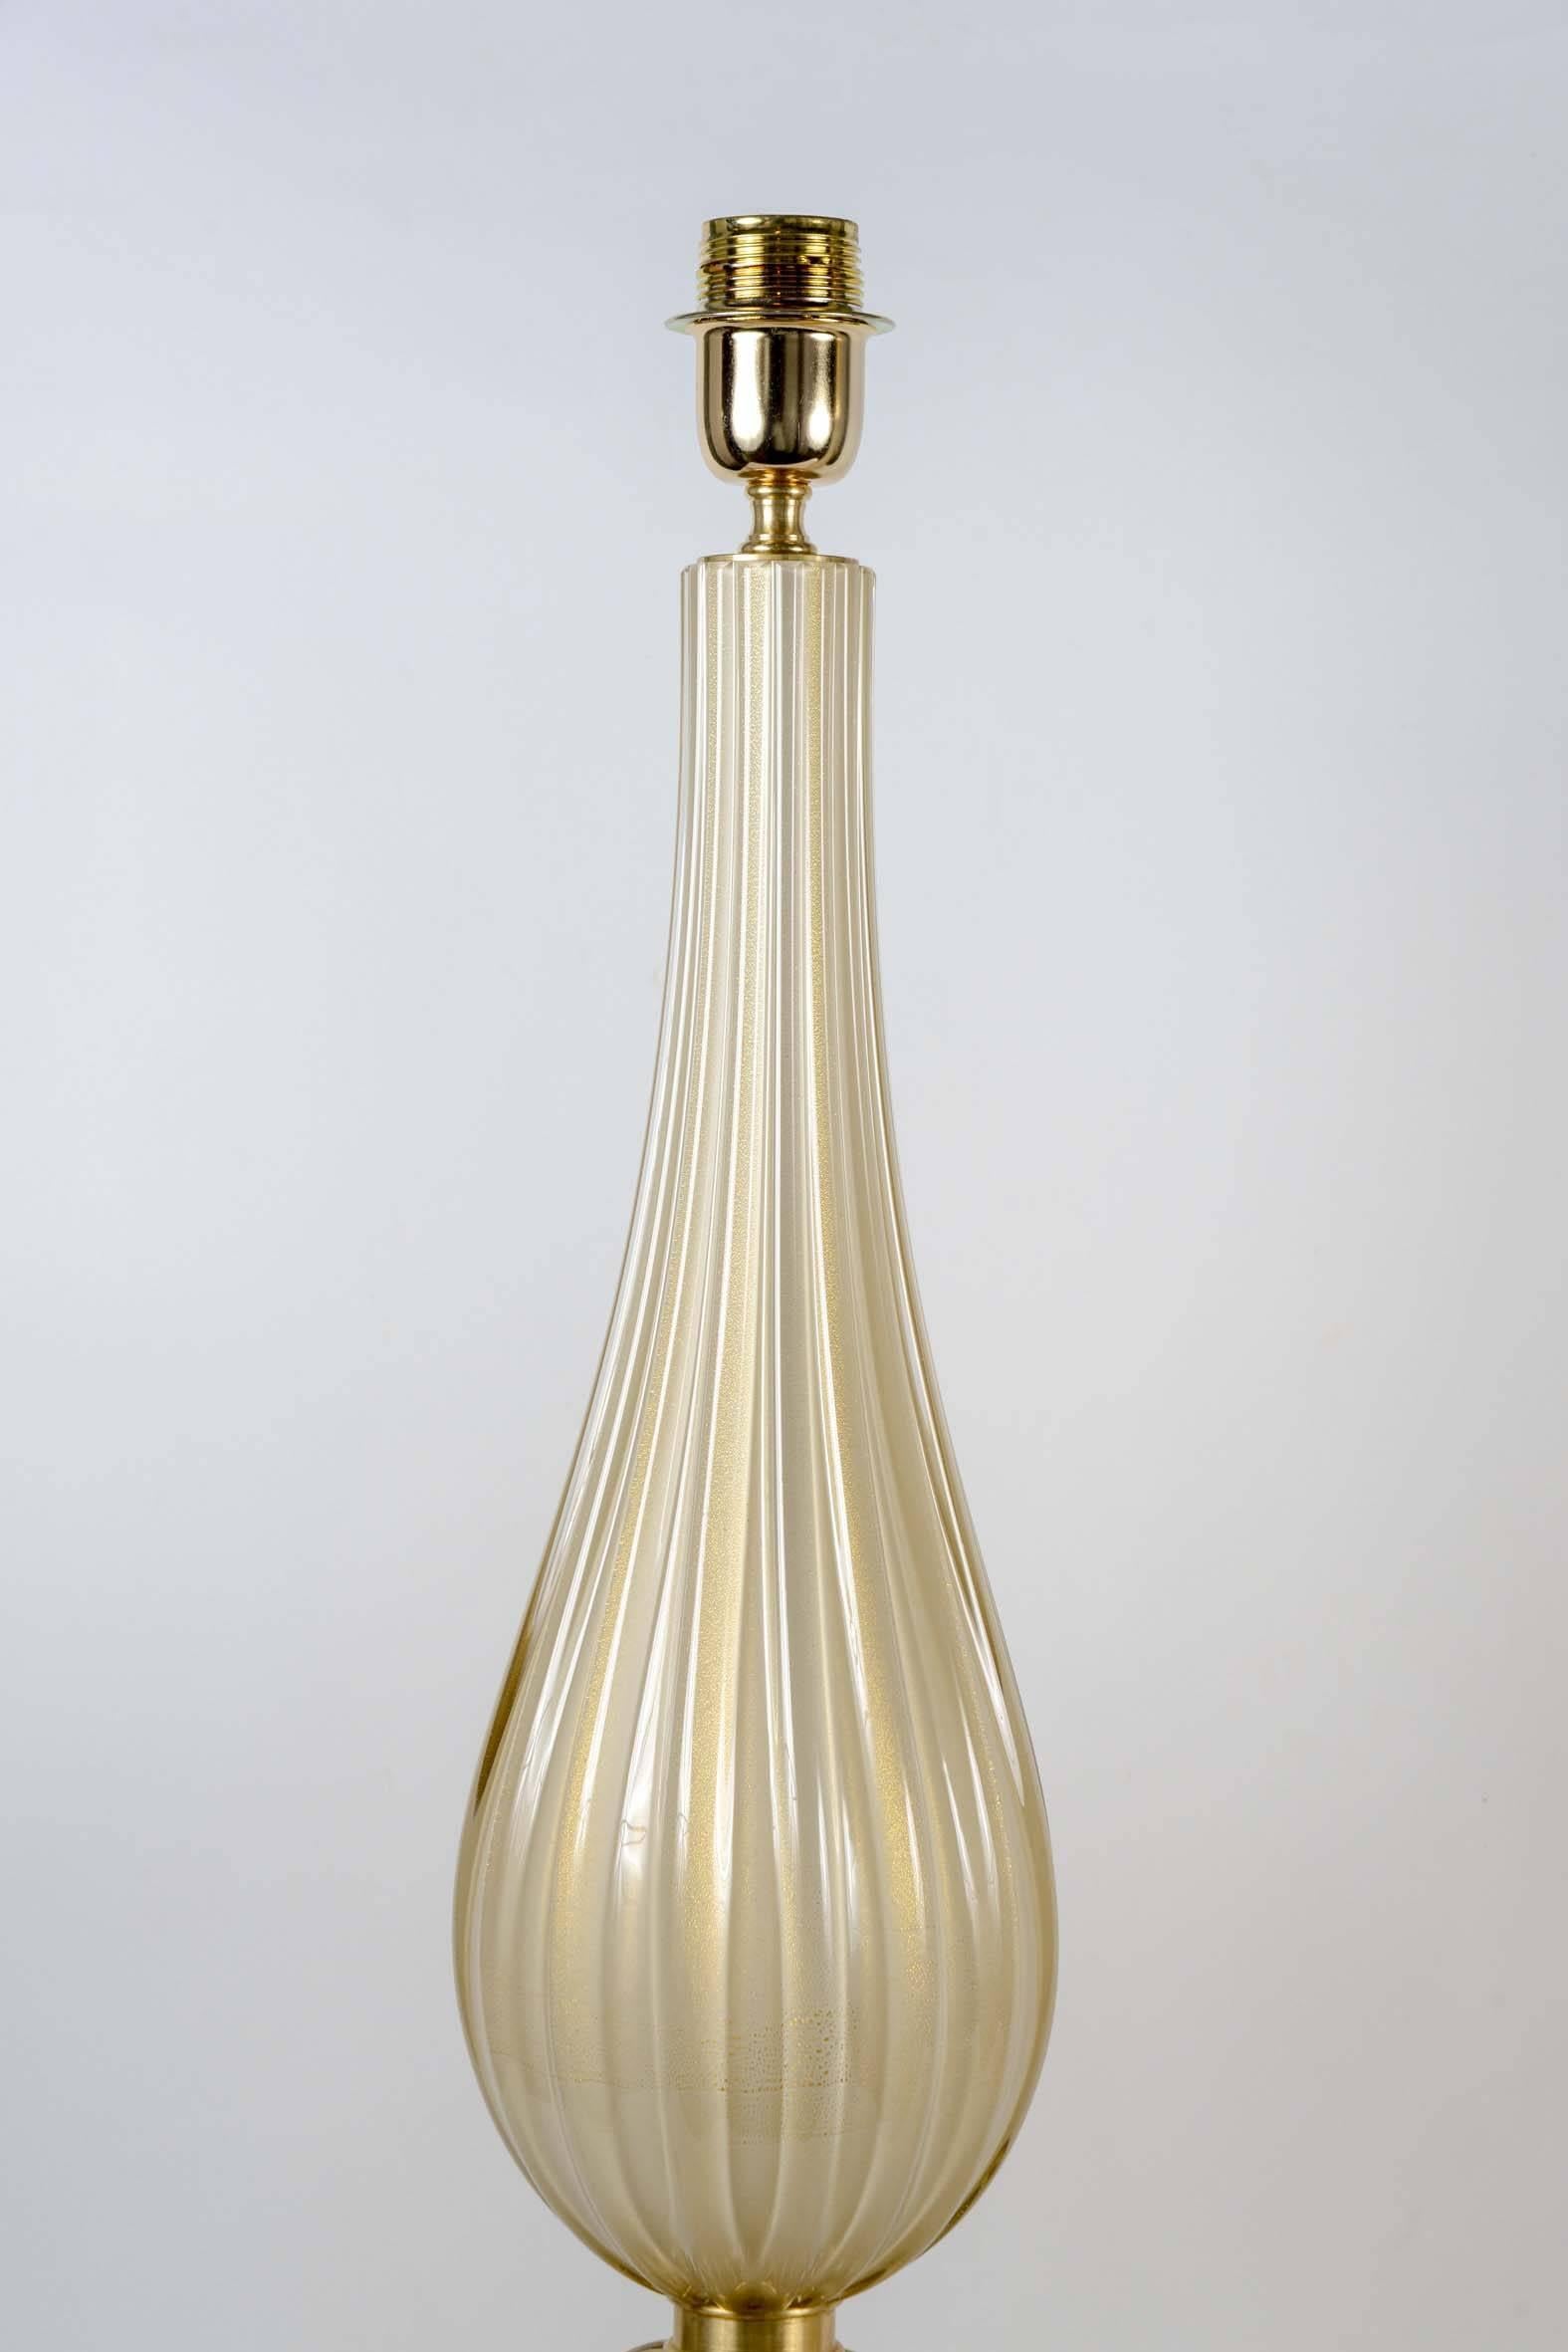 Pair of table lamps in Murano glass.